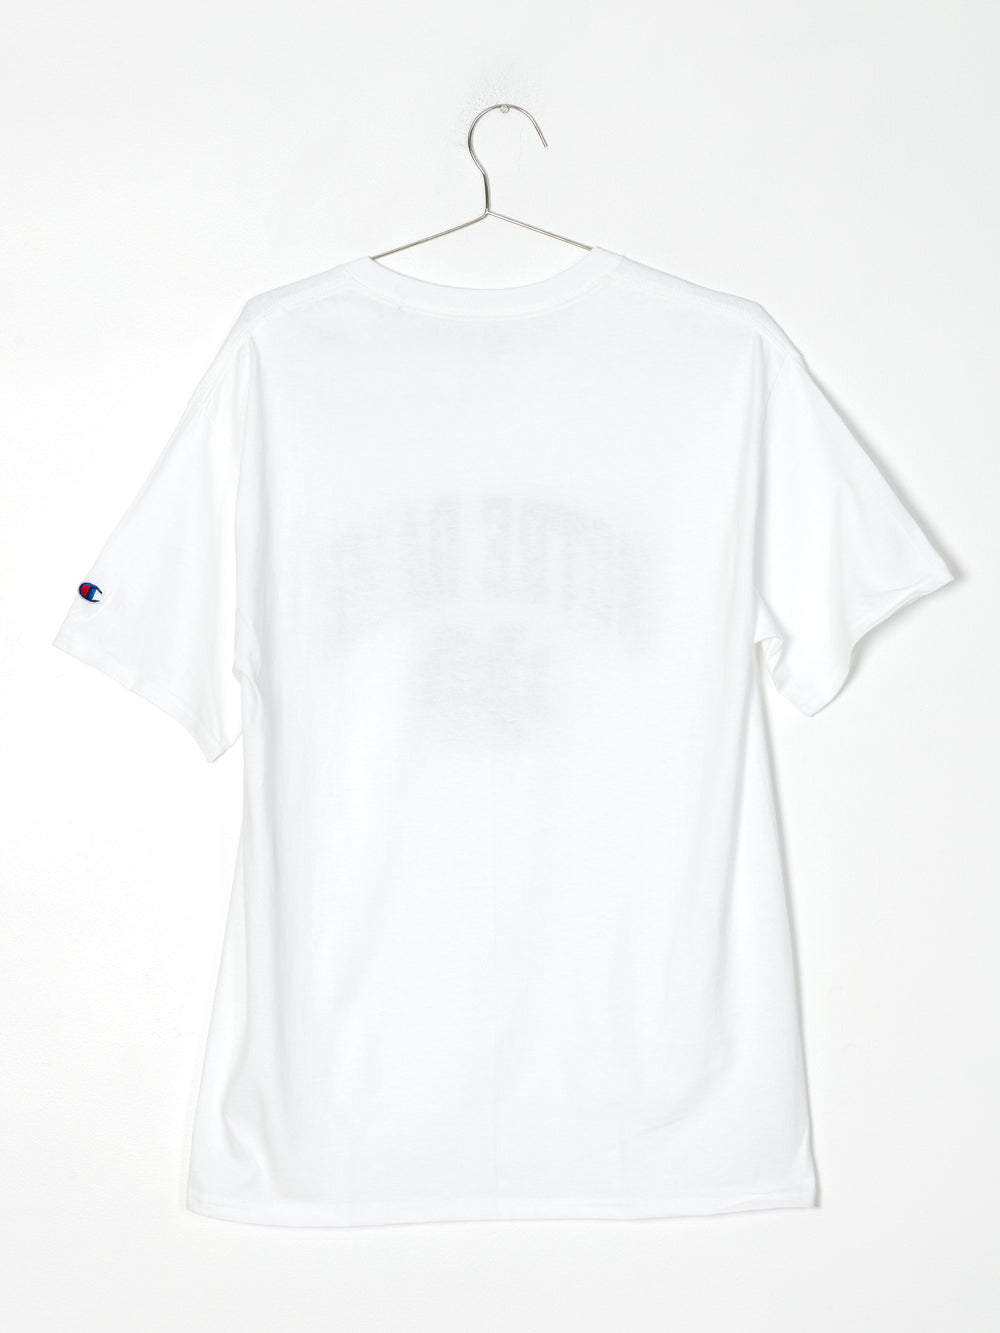 CHAMPION NOTRE DAME SHORT SLEEVE UNIVERSITY TEE   - CLEARANCE